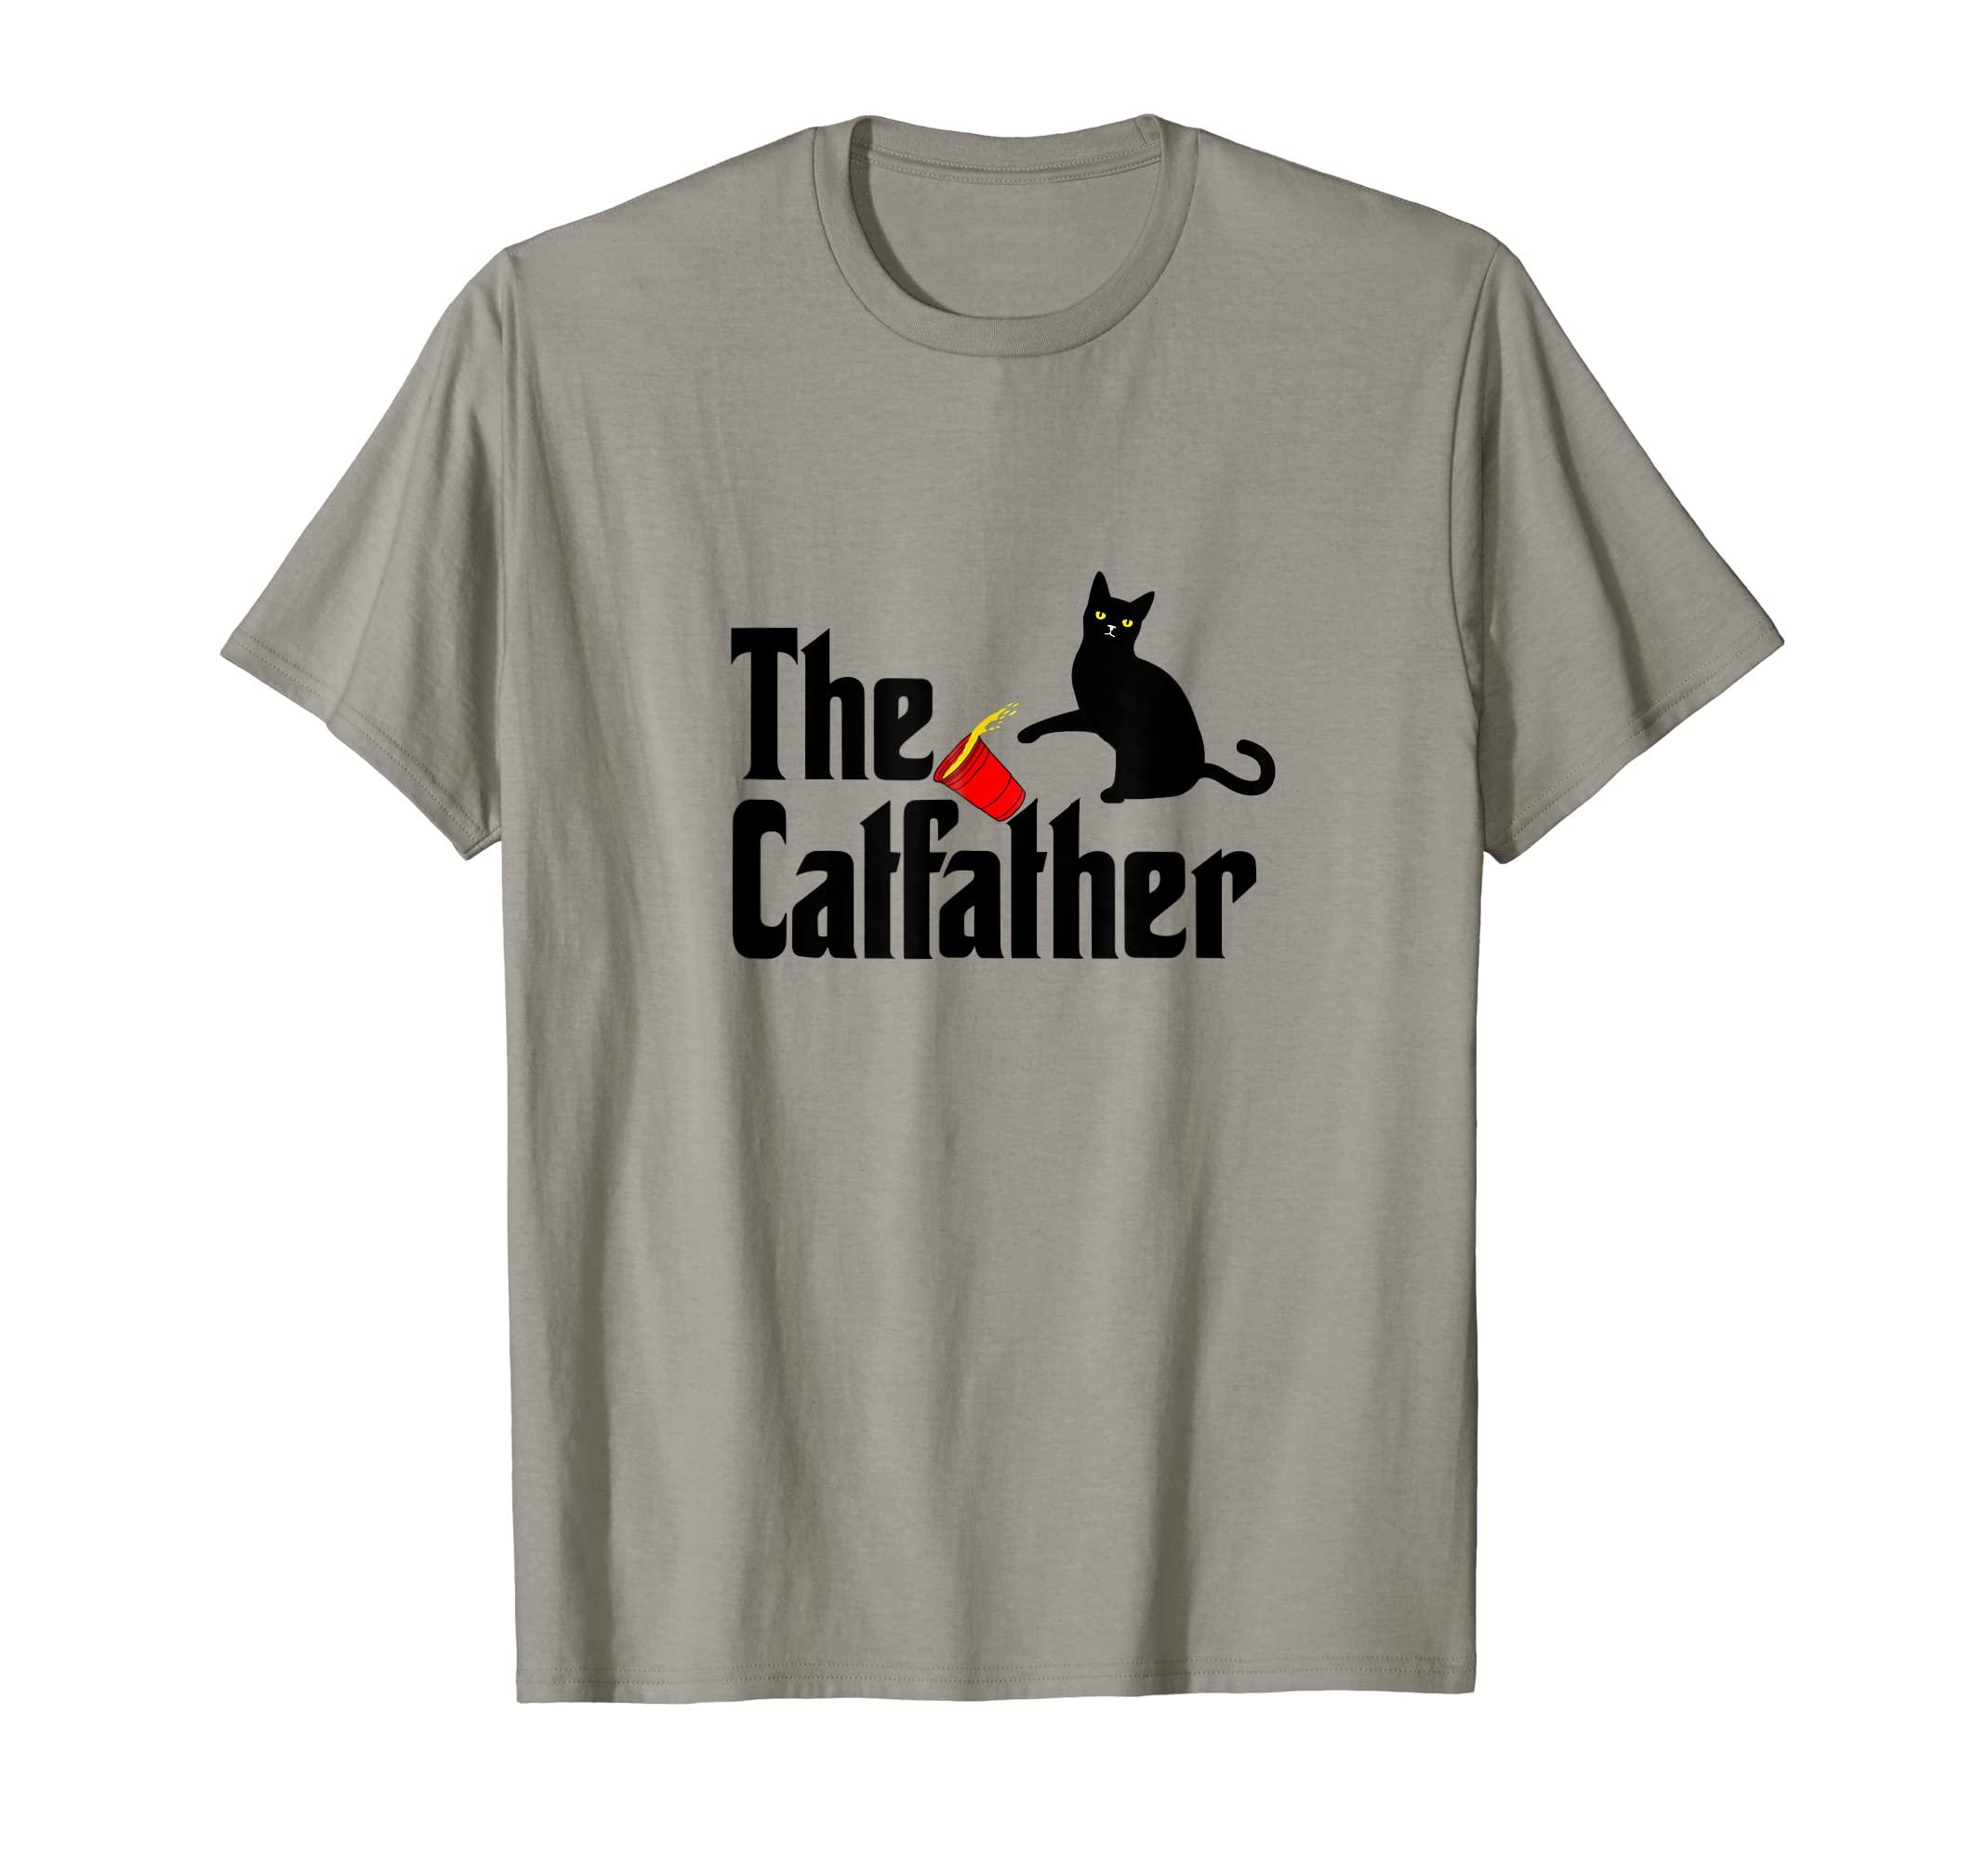 Caterpillar Black Cat Shirt: The Catfather Meow Kitty Funny Cats Dad T ...